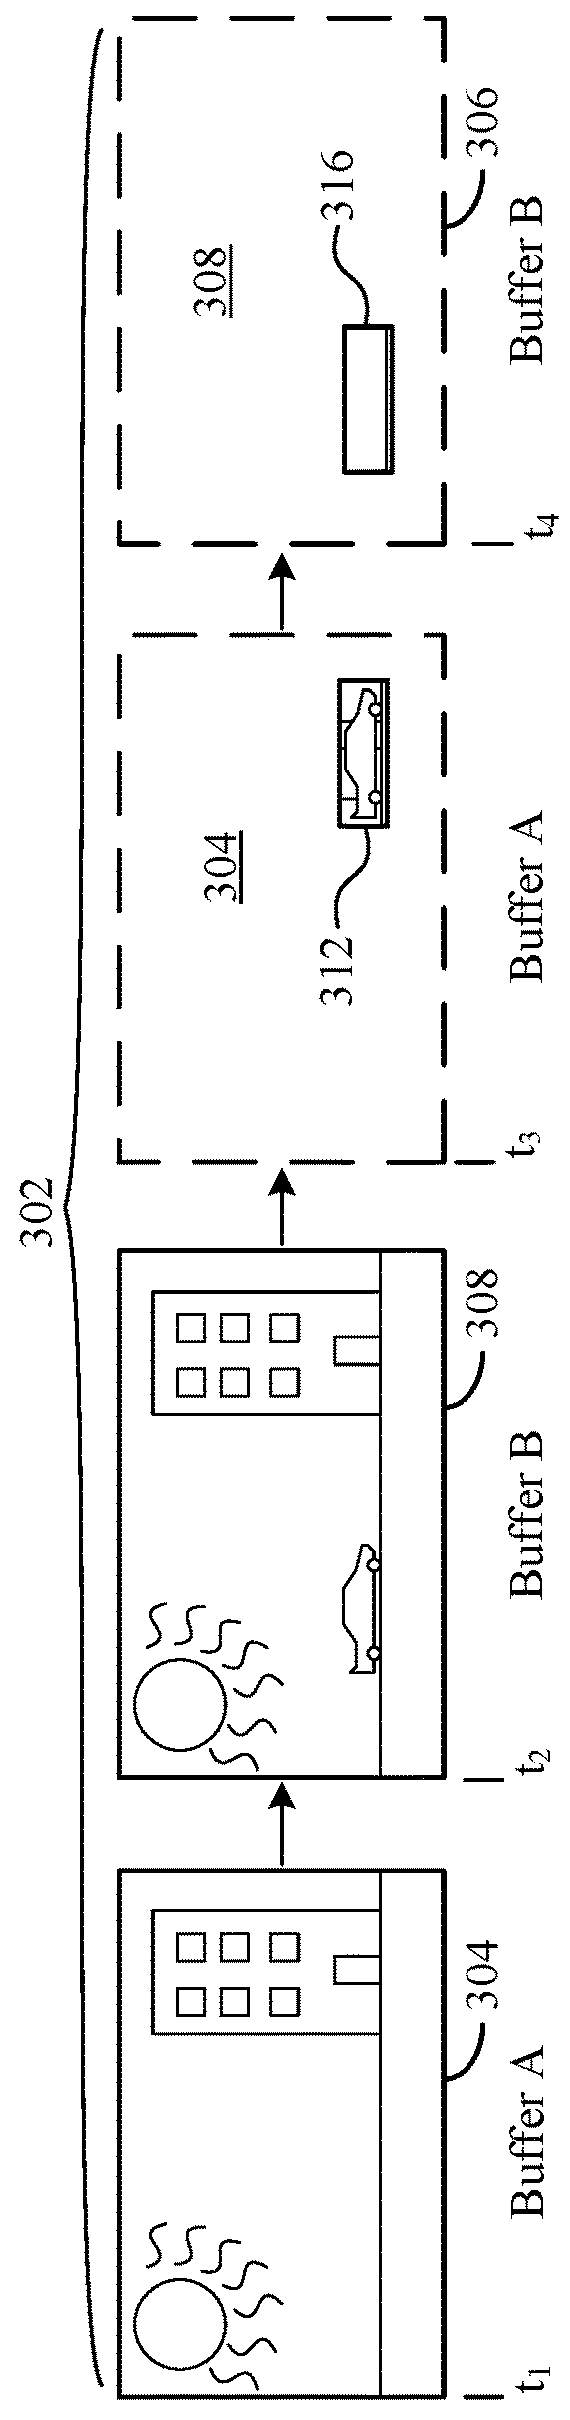 Display system and method supporting variable input rate and resolution